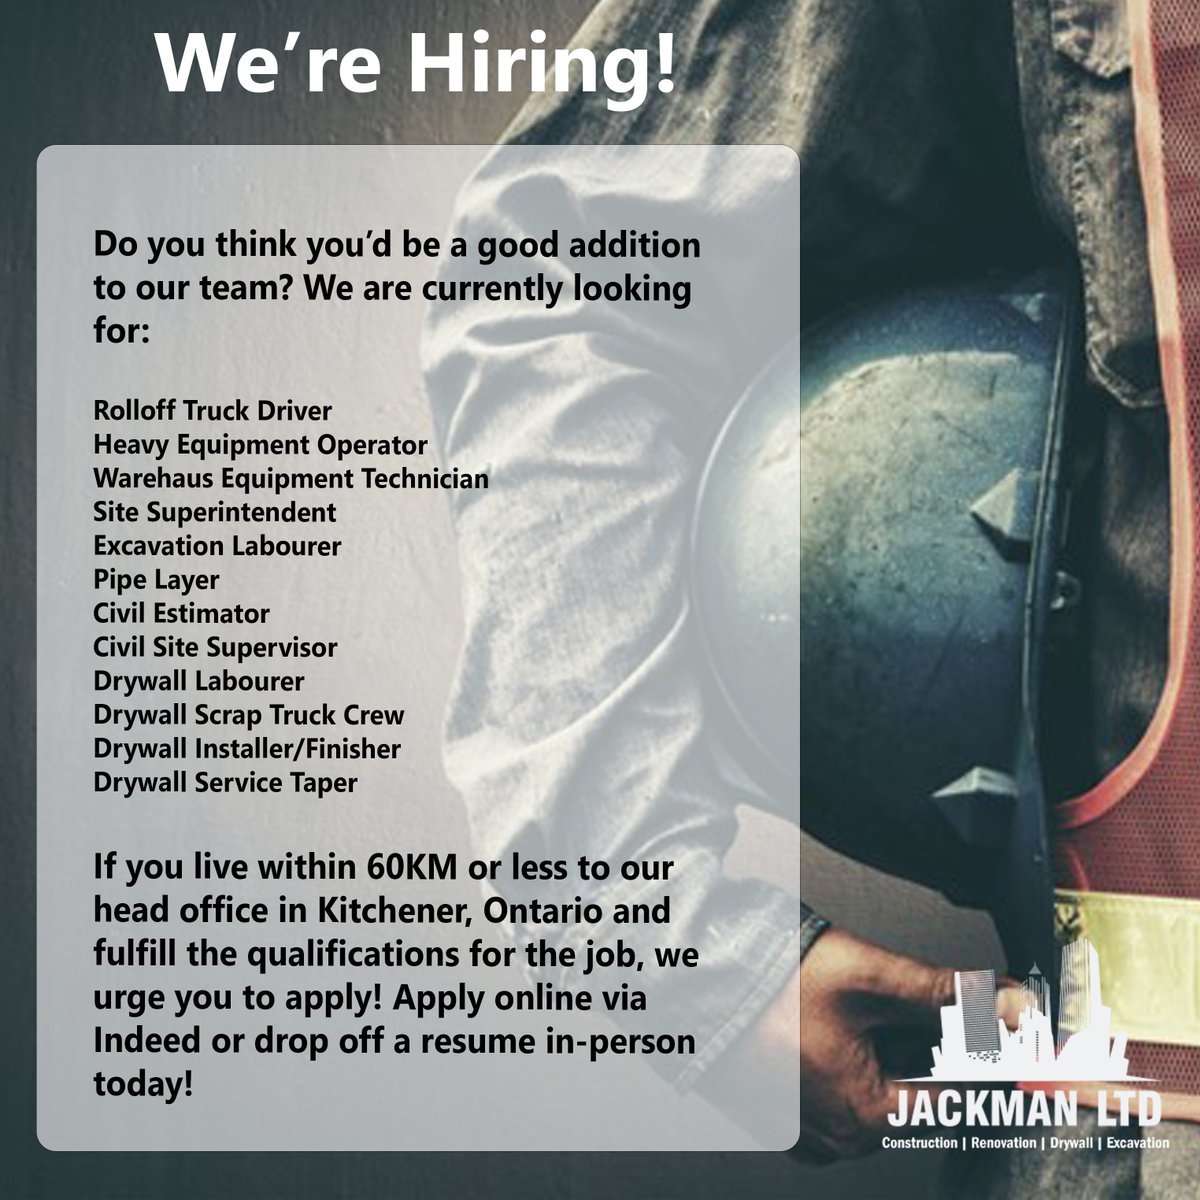 We're hiring multiple positions and looking for some experienced individuals to fill them. If you or someone you know is looking and can satisfy the qualifications - then apply now! We are accepting resumes via Indeed (link in bio) or in person.#workwithus #hardwork #jackmanltd